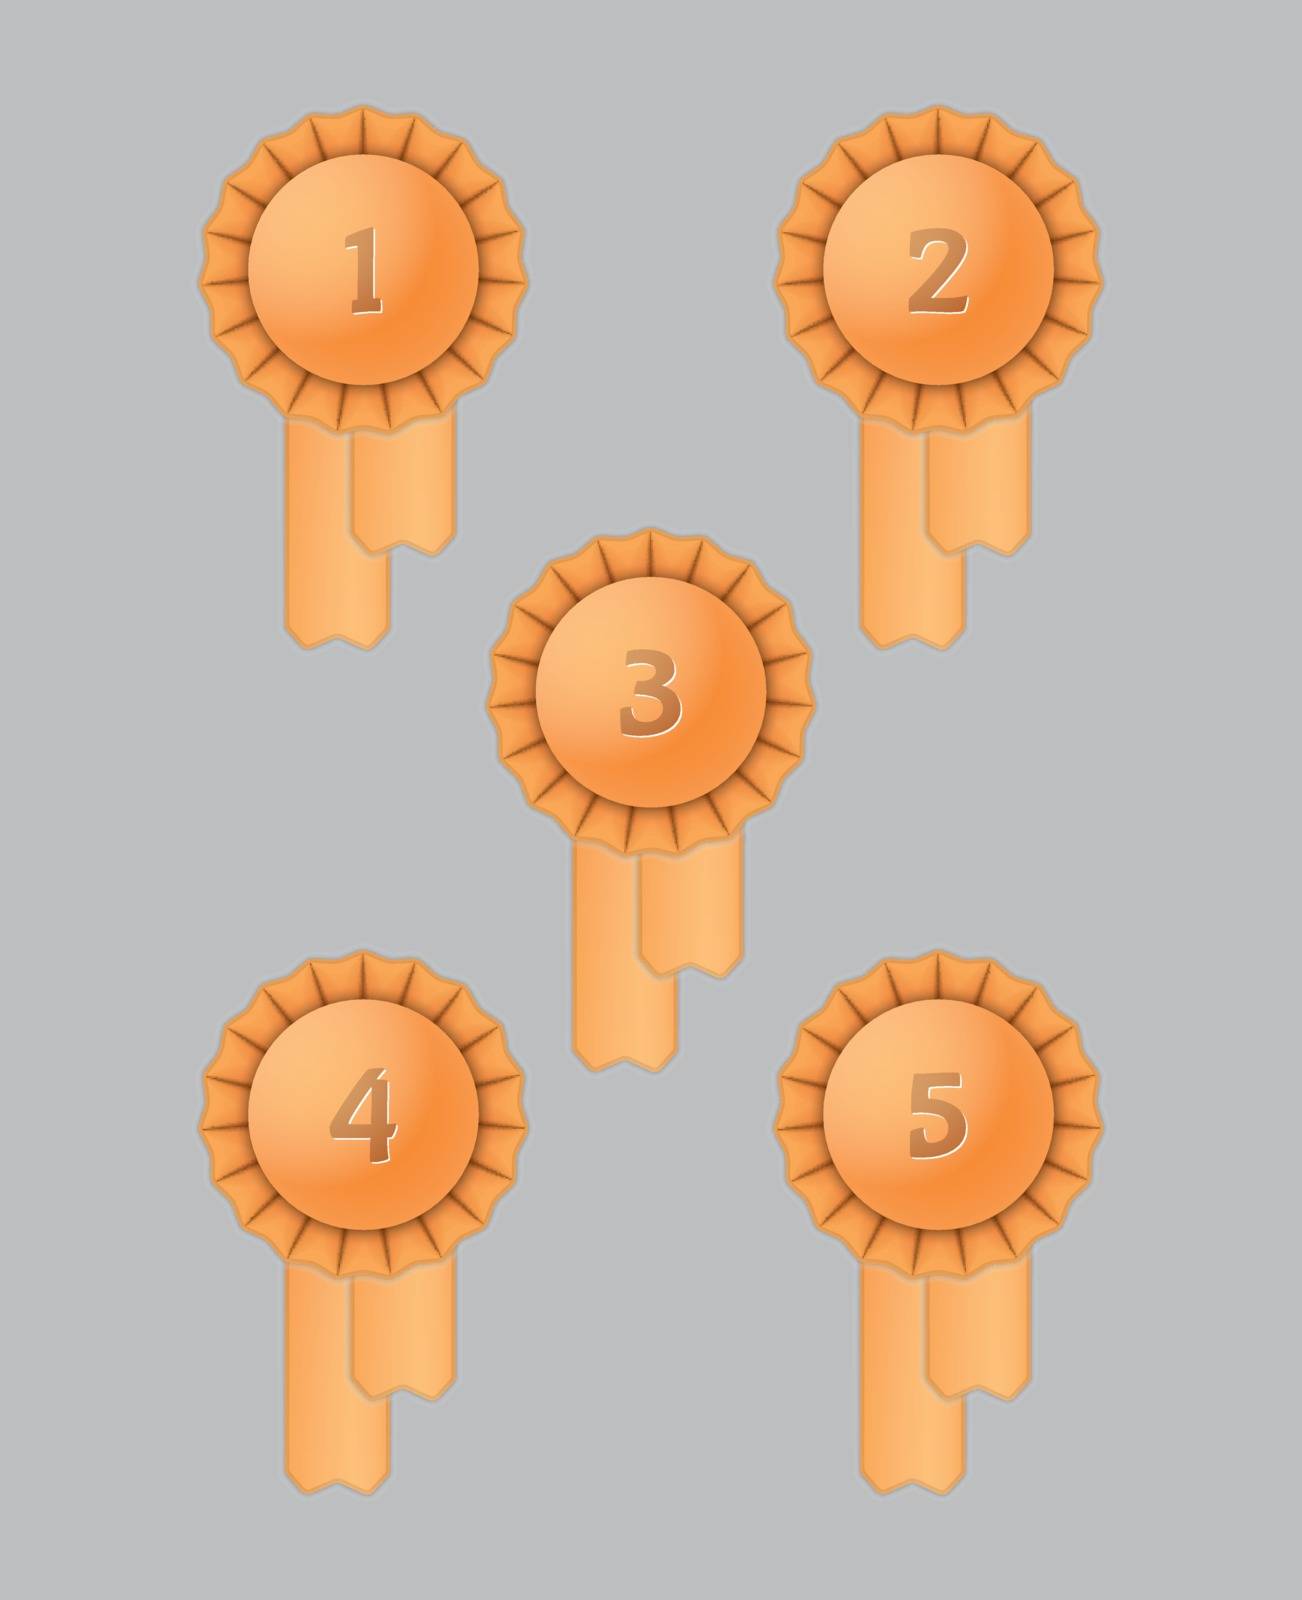 gold award ribbons with numbers one, two, three, four and six, vector illustration